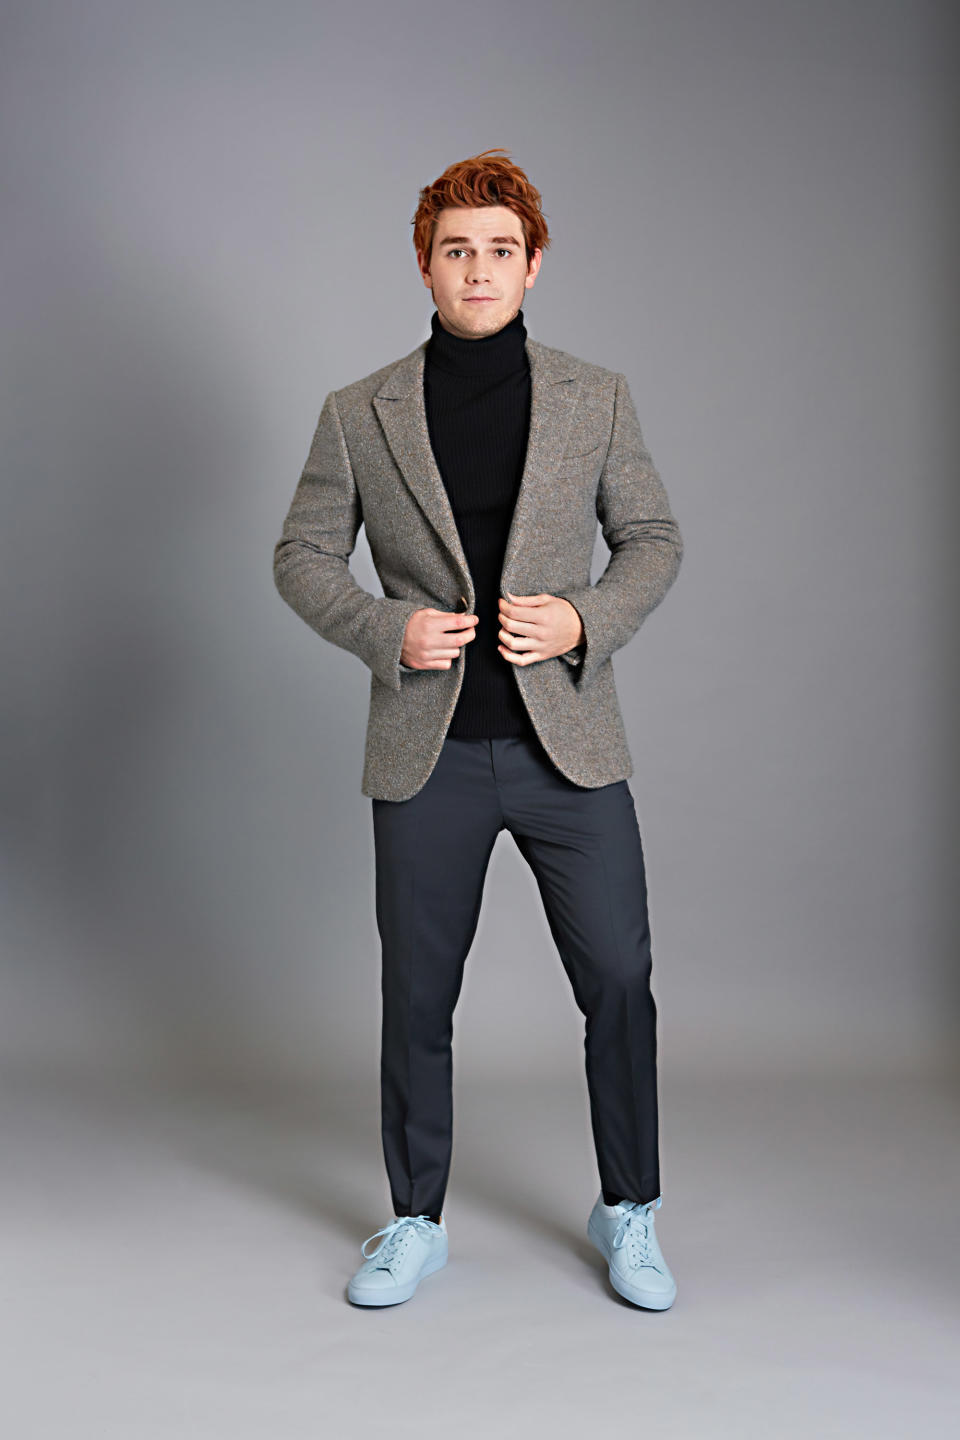 <p>Suit jacket by Ermenegildo Zegna Couture, turtleneck sweater by Theory, trousers by Tommy Hilfiger, sneakers by Koio.</p>